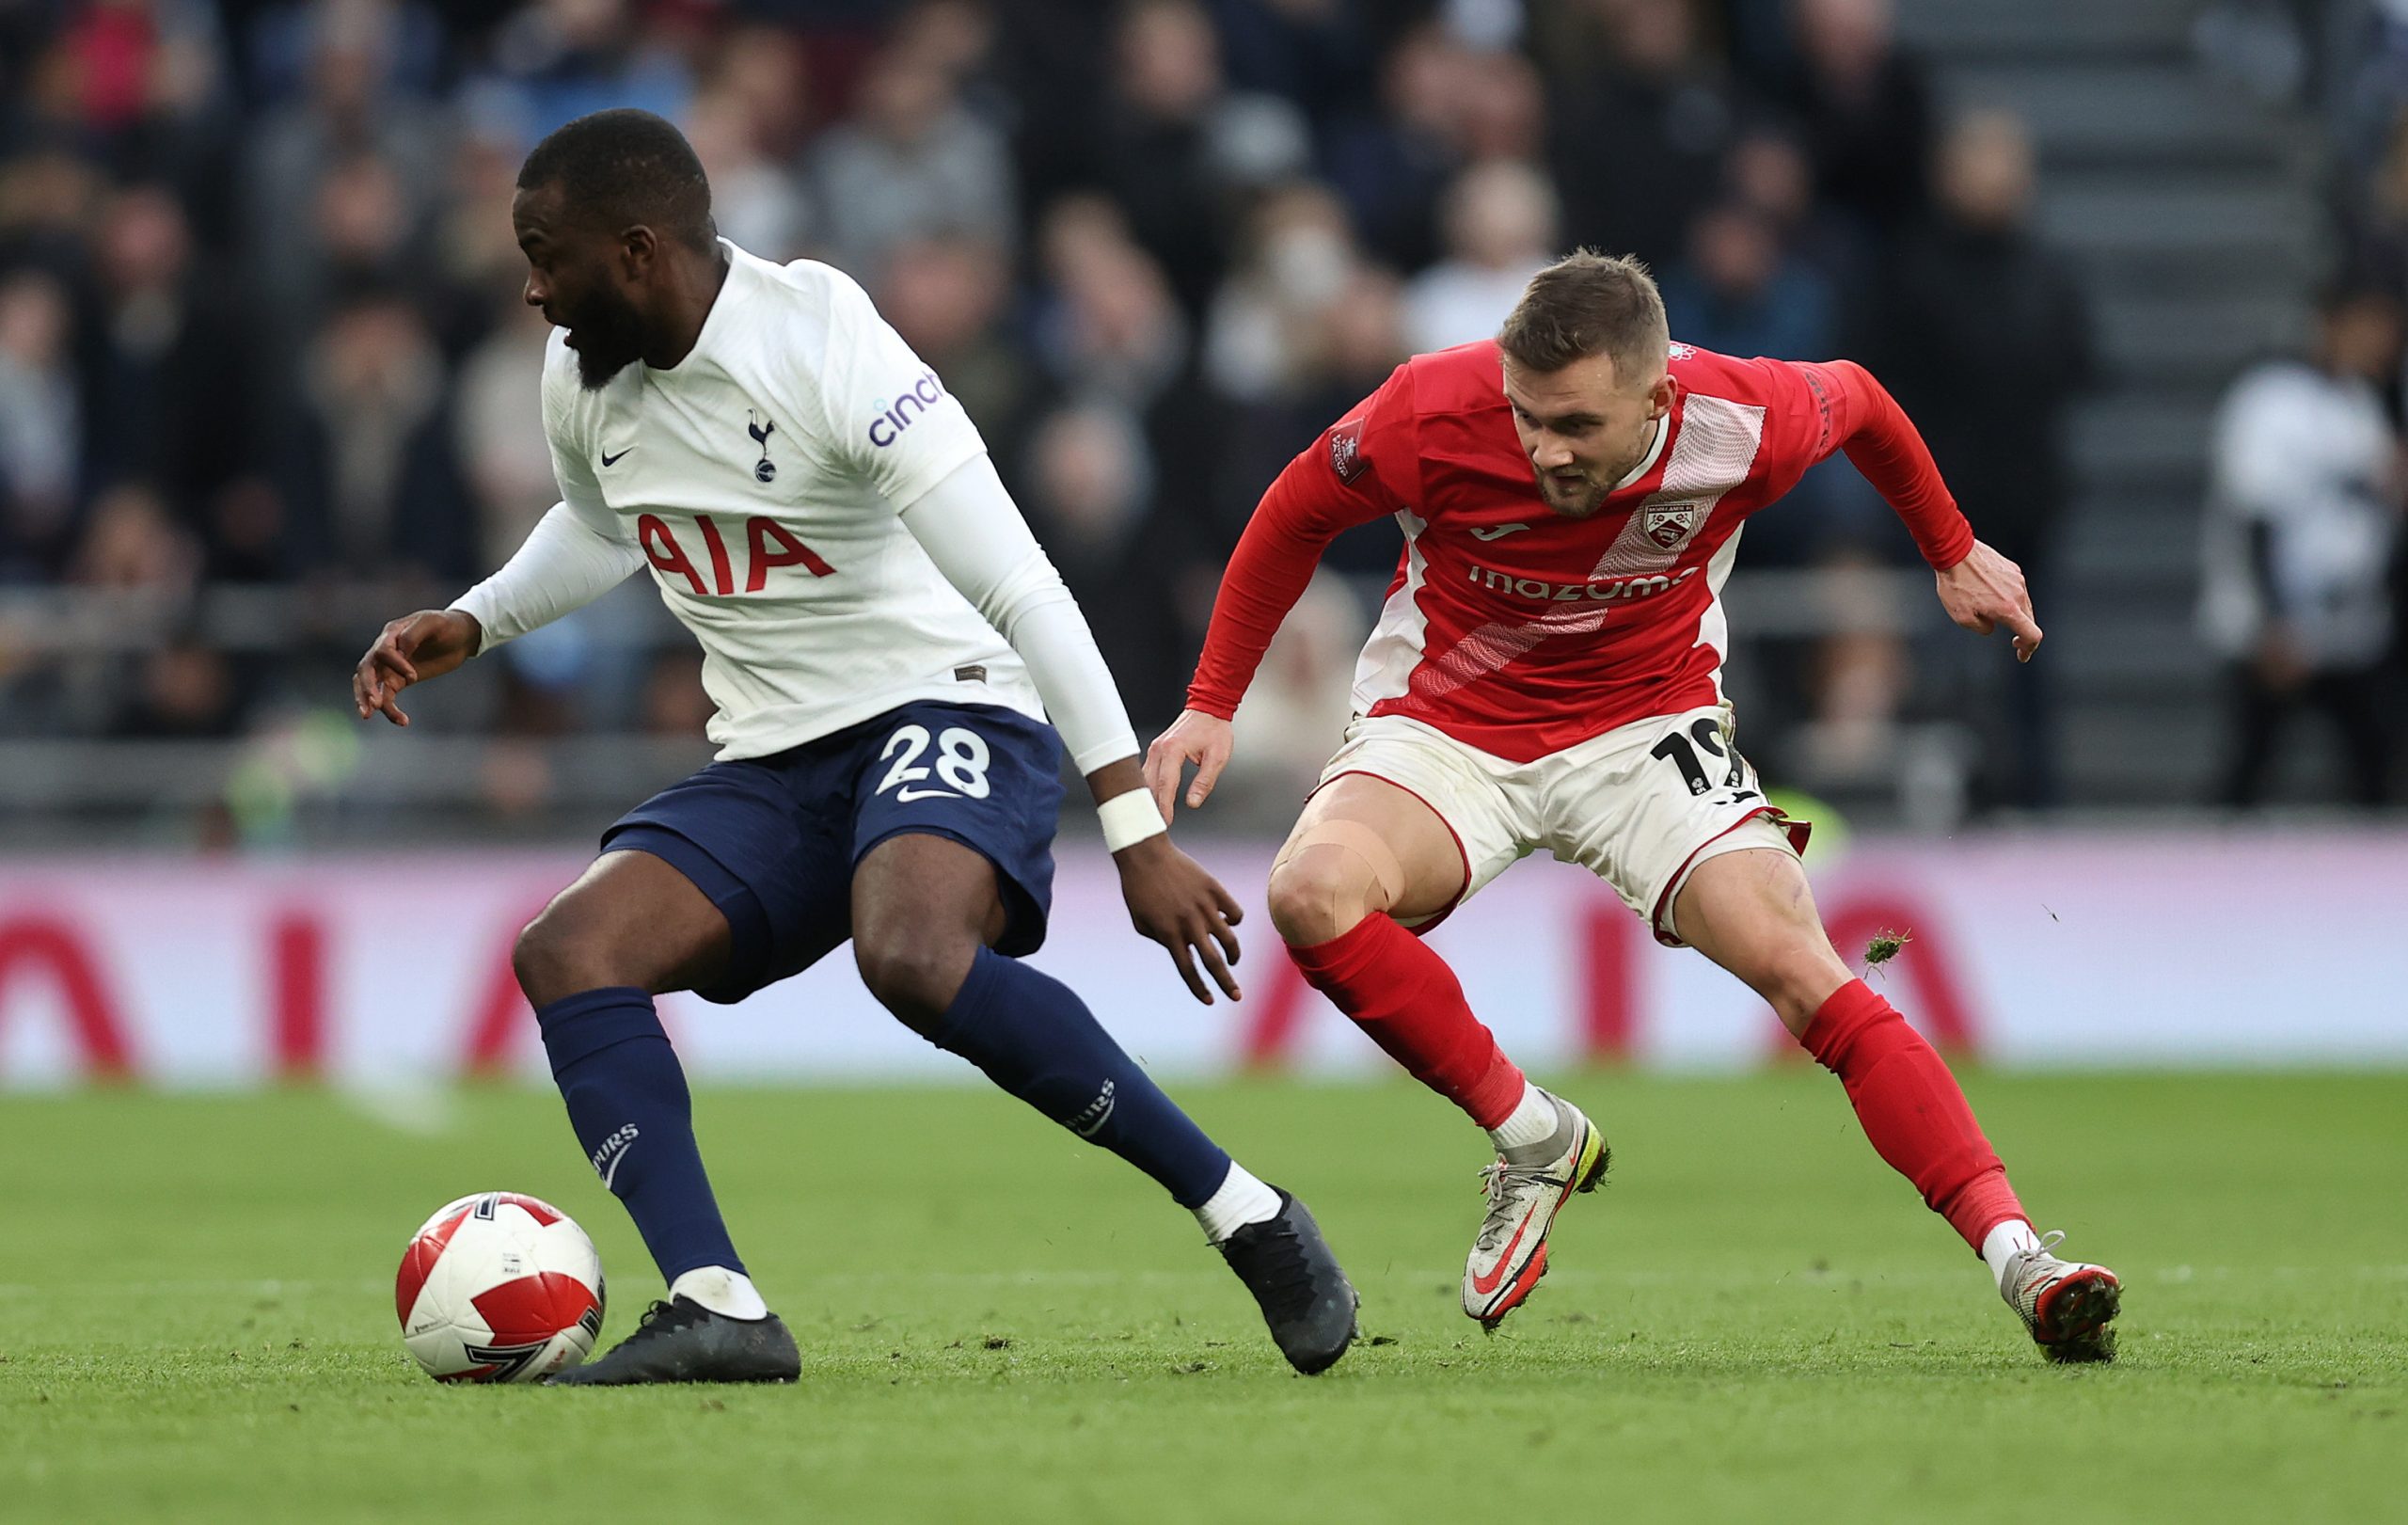 Tanguy Ndombele of Spurs battles with Shane McLoughlin of Morcambe.